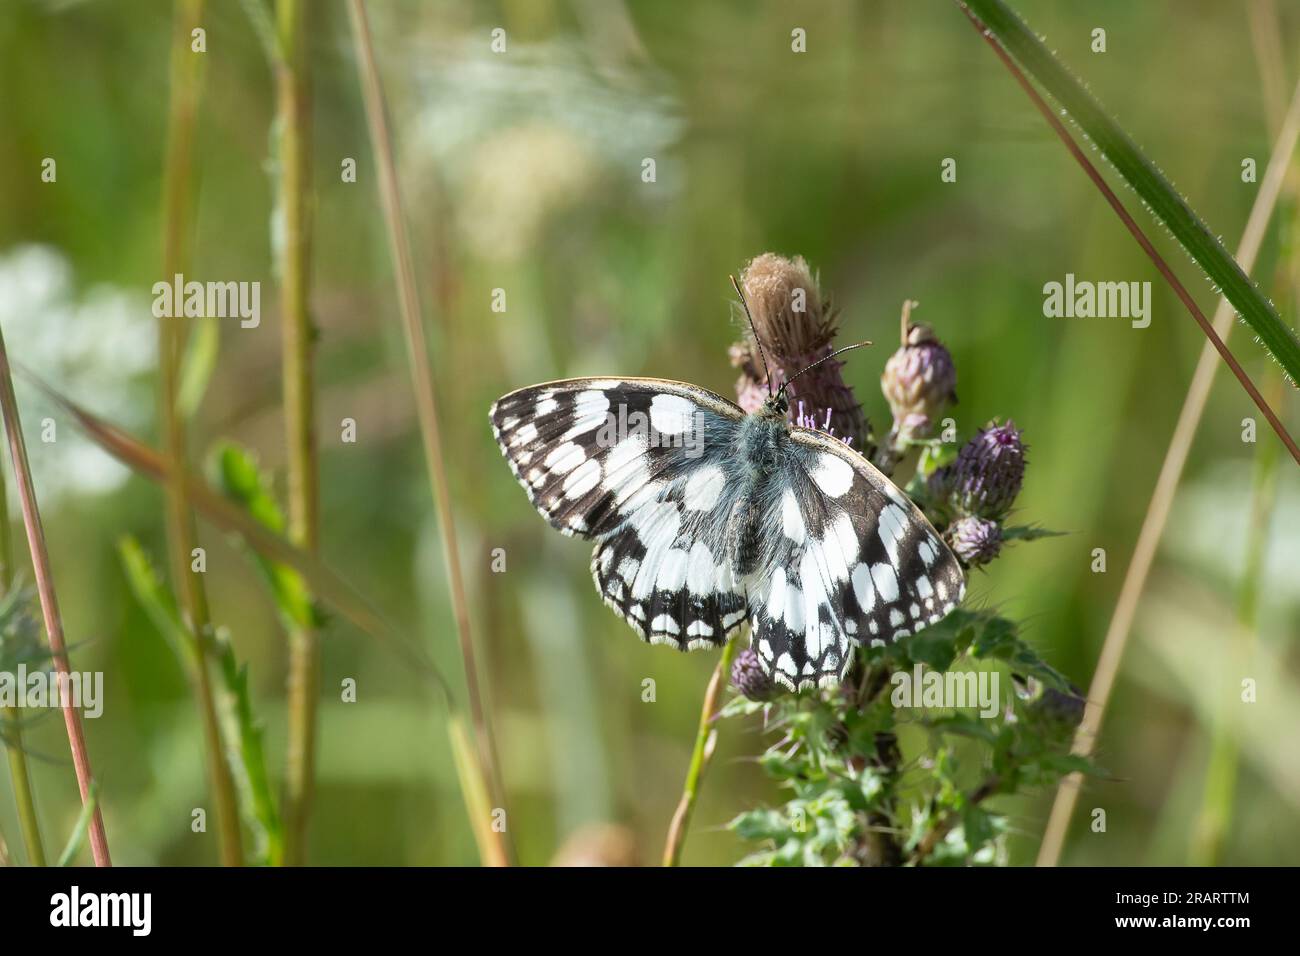 Dorney, Buckinghamshire, UK. A Melanargia galathea, a Marbled white butterfly with distinctive black and white markings feeding in grassland. The Marbled White is a medium-sized butterfly in the family Nymphalidae Stock Photo